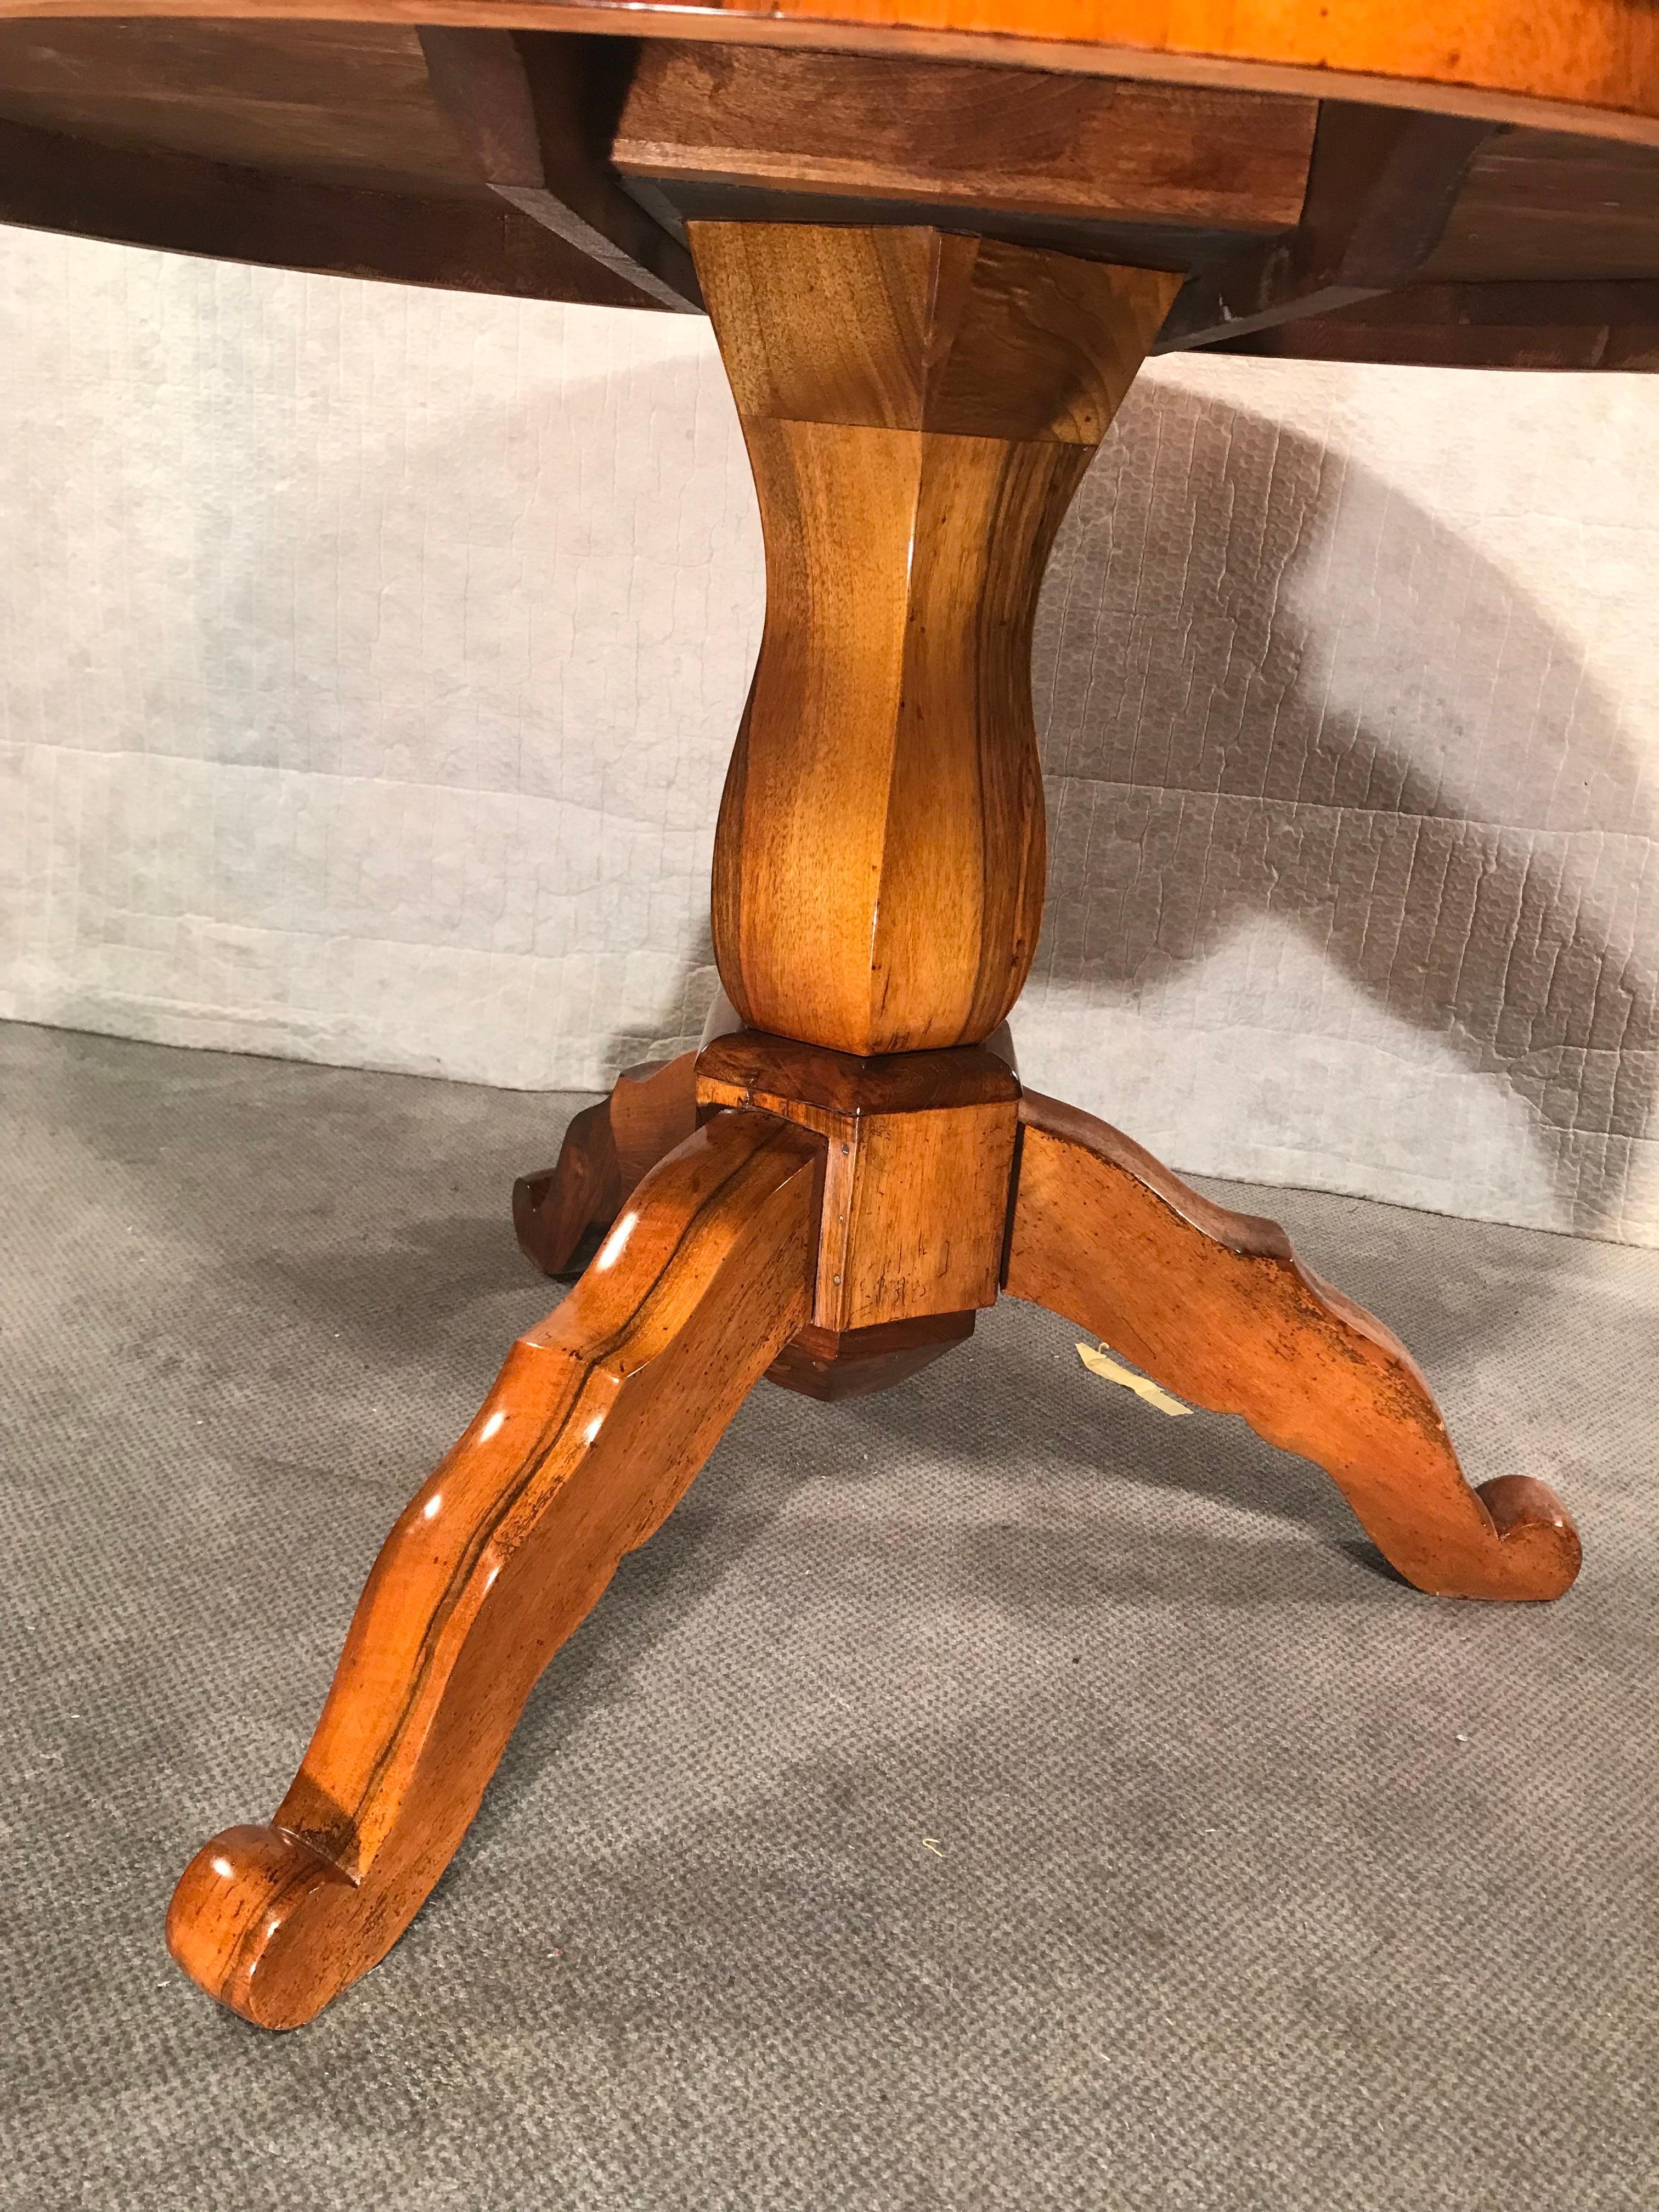 This unique Biedermeier table is truly a masterpiece. Its standout feature is the beautiful walnut veneer grain on the top, elegantly supported by a tripod foot and a central column. The craftsmanship and attention to detail are evident in every